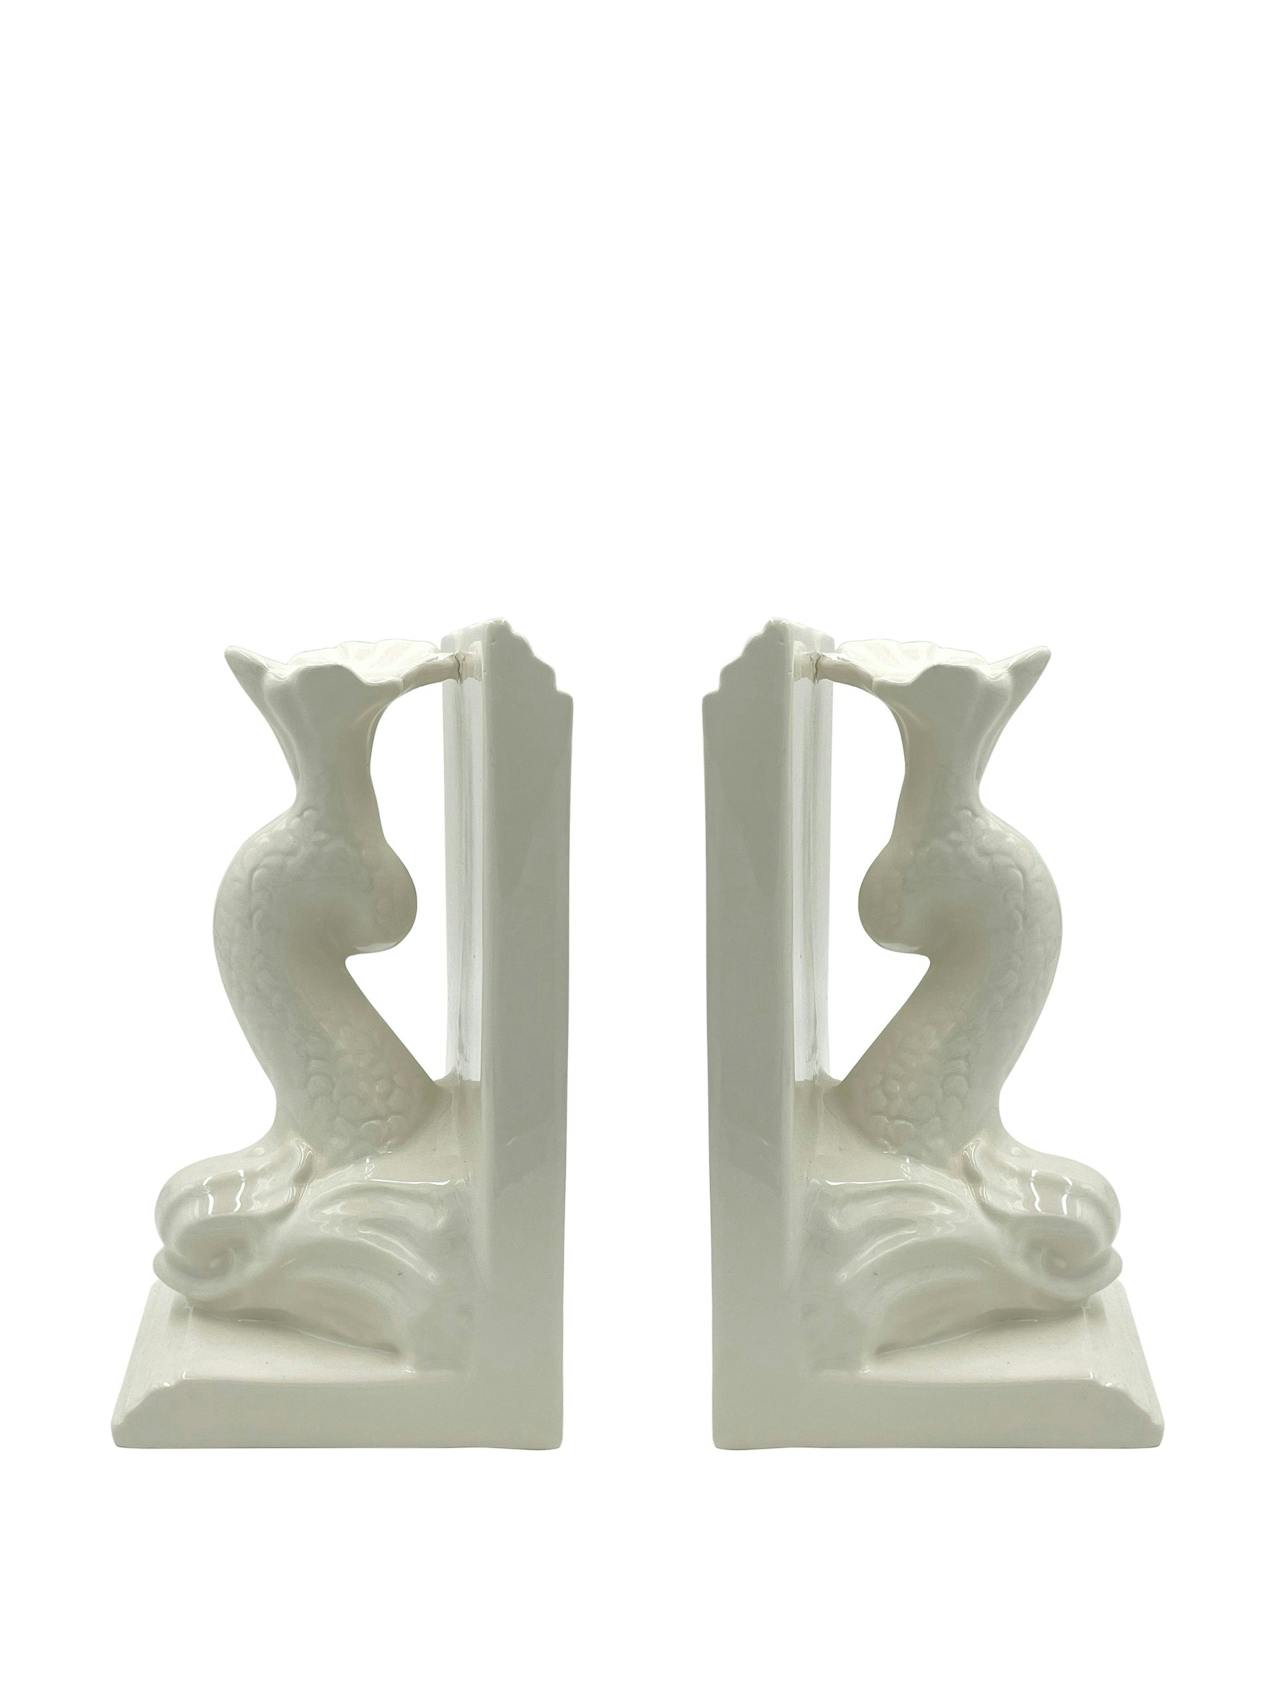 Pair of dolphin bookends in cream